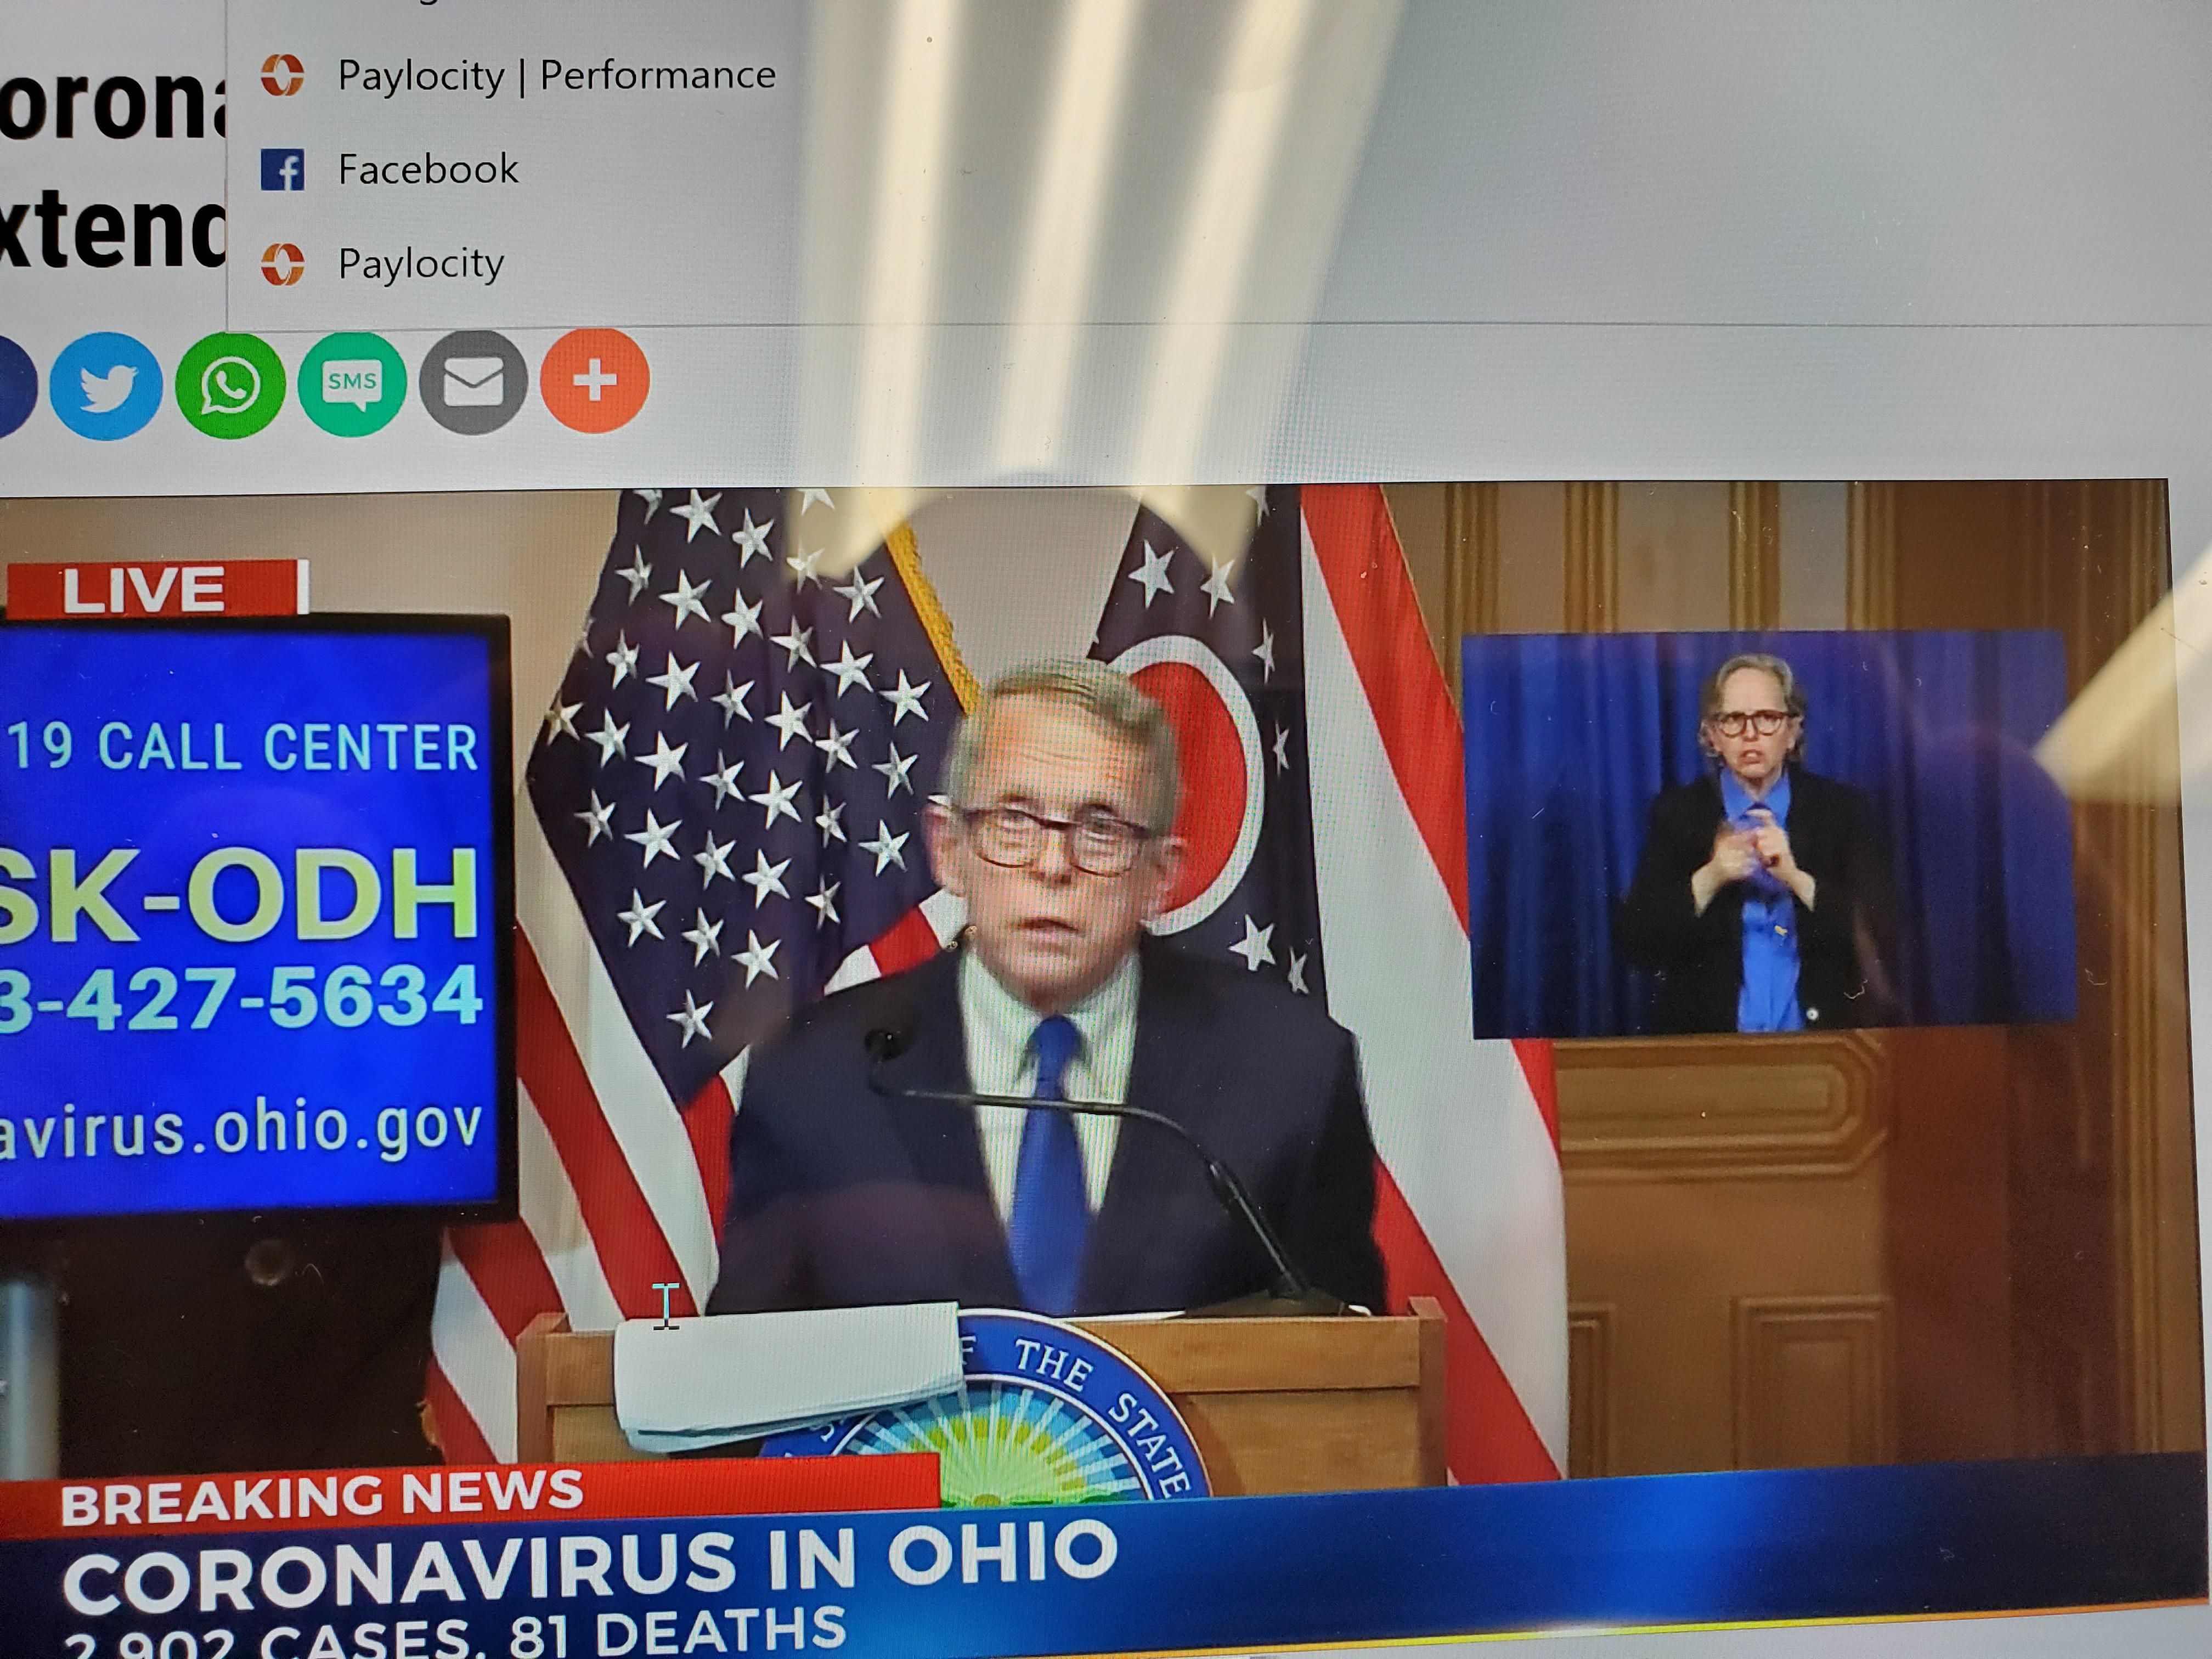 Ohio's Governors sign language person looks like him dressed as a woman.....